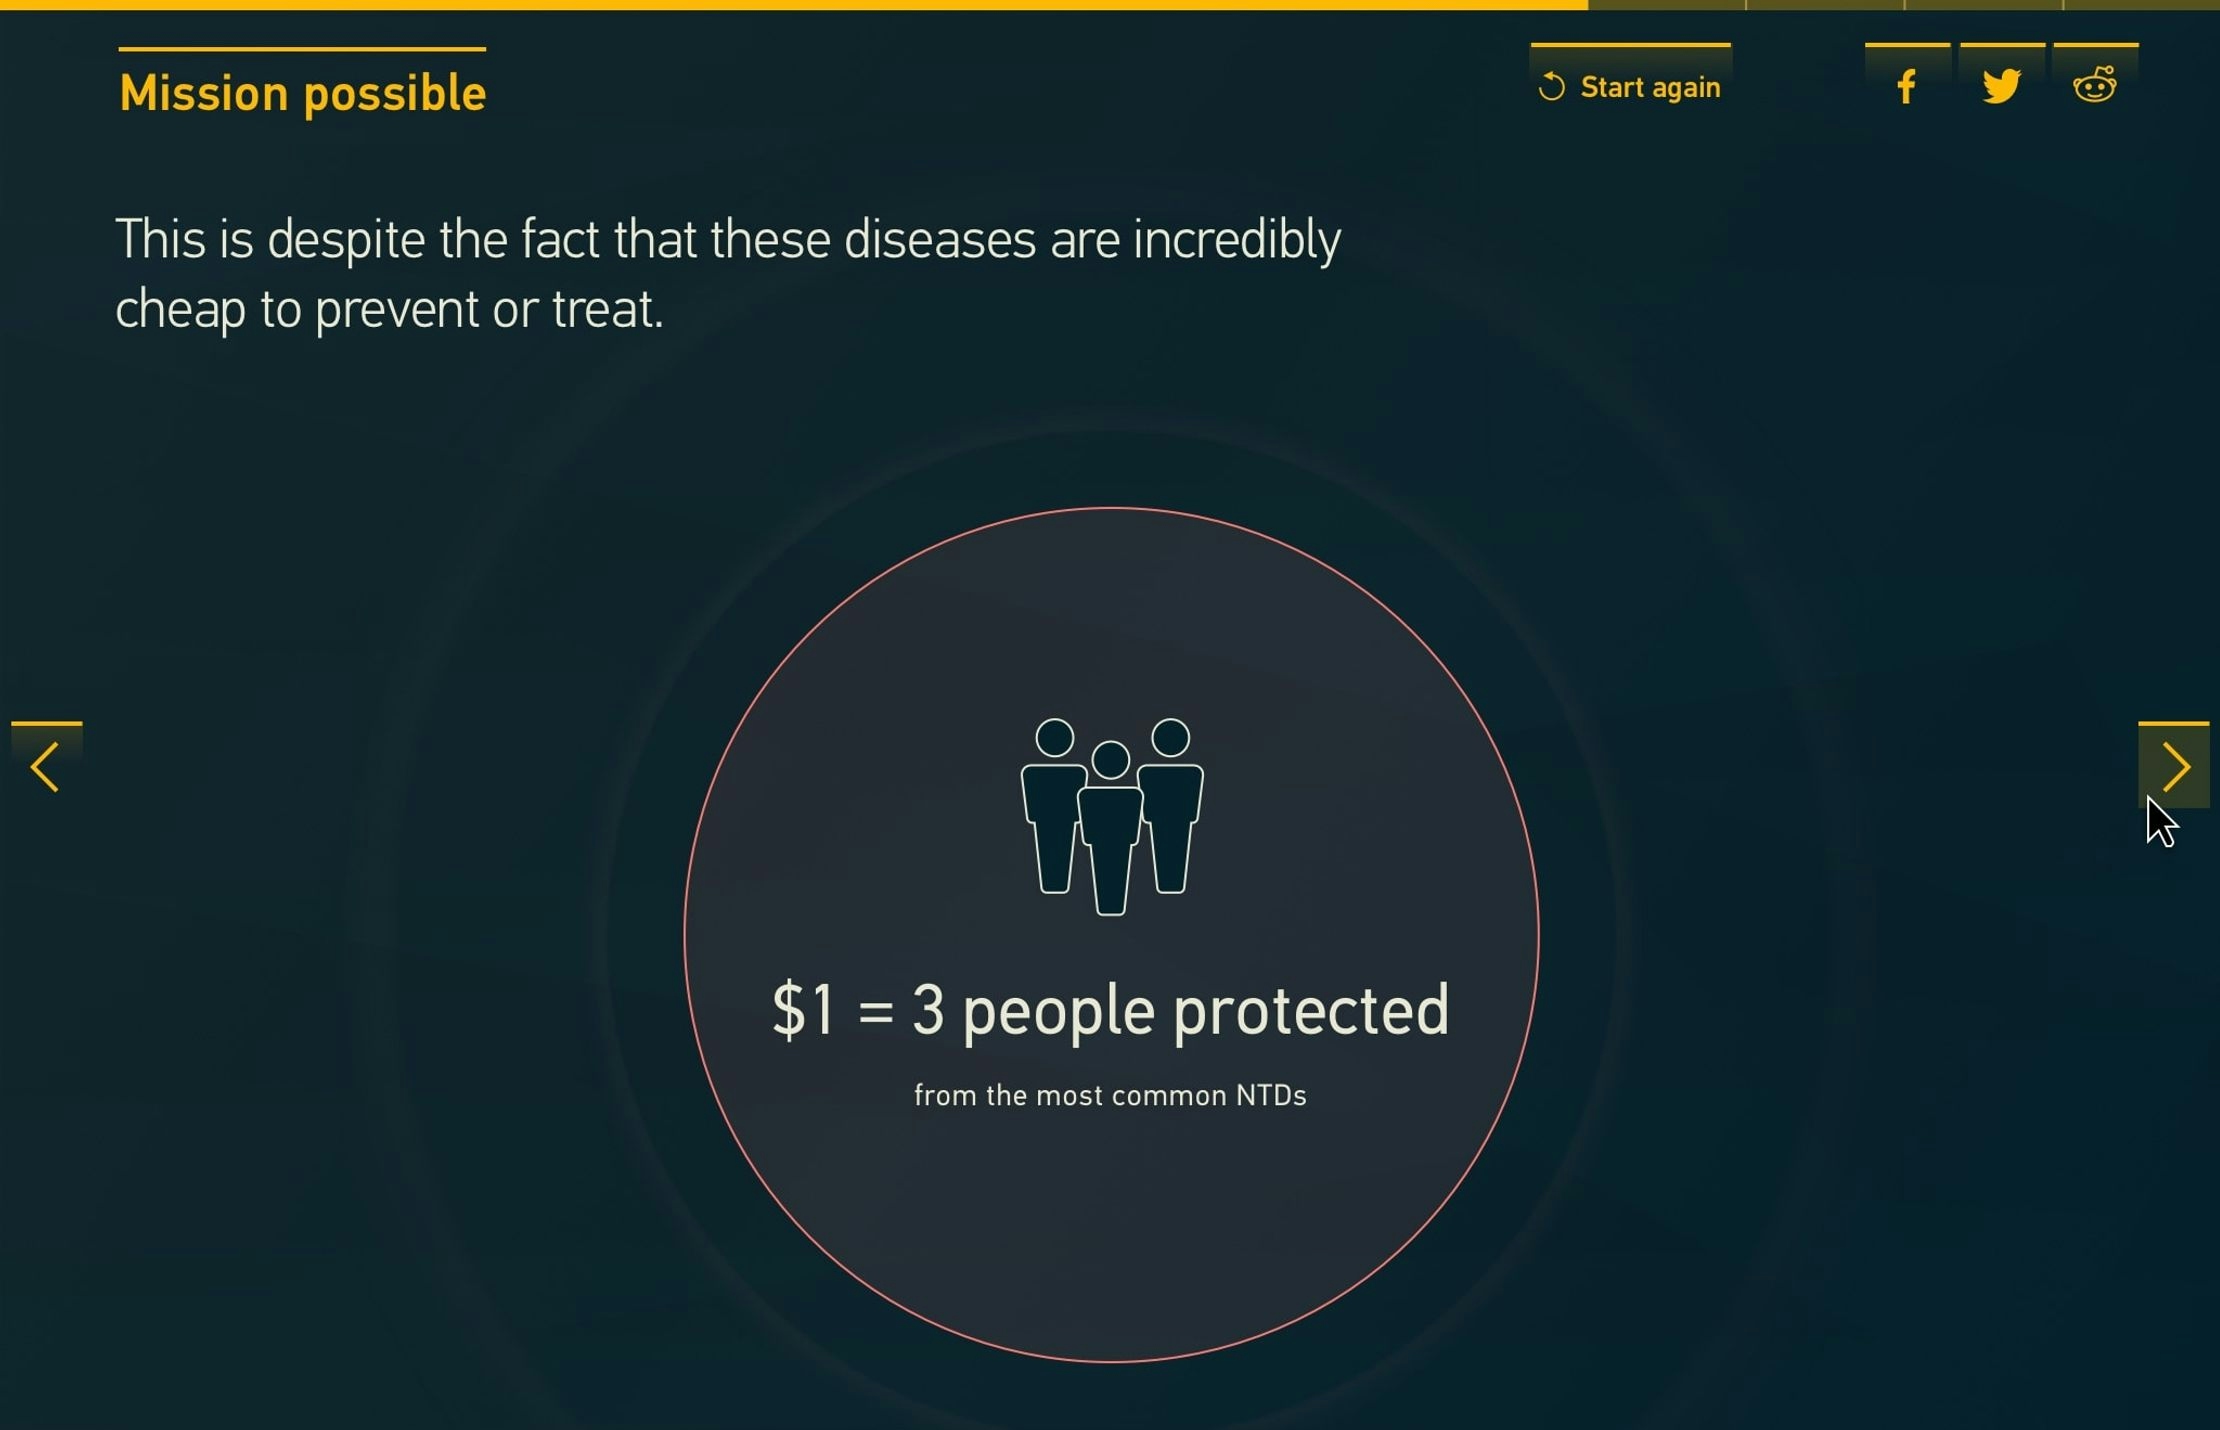 A circular graphic containing three silhouettes of people. Below them is the text '$1 = 3 people protected' from the most common NTDs.